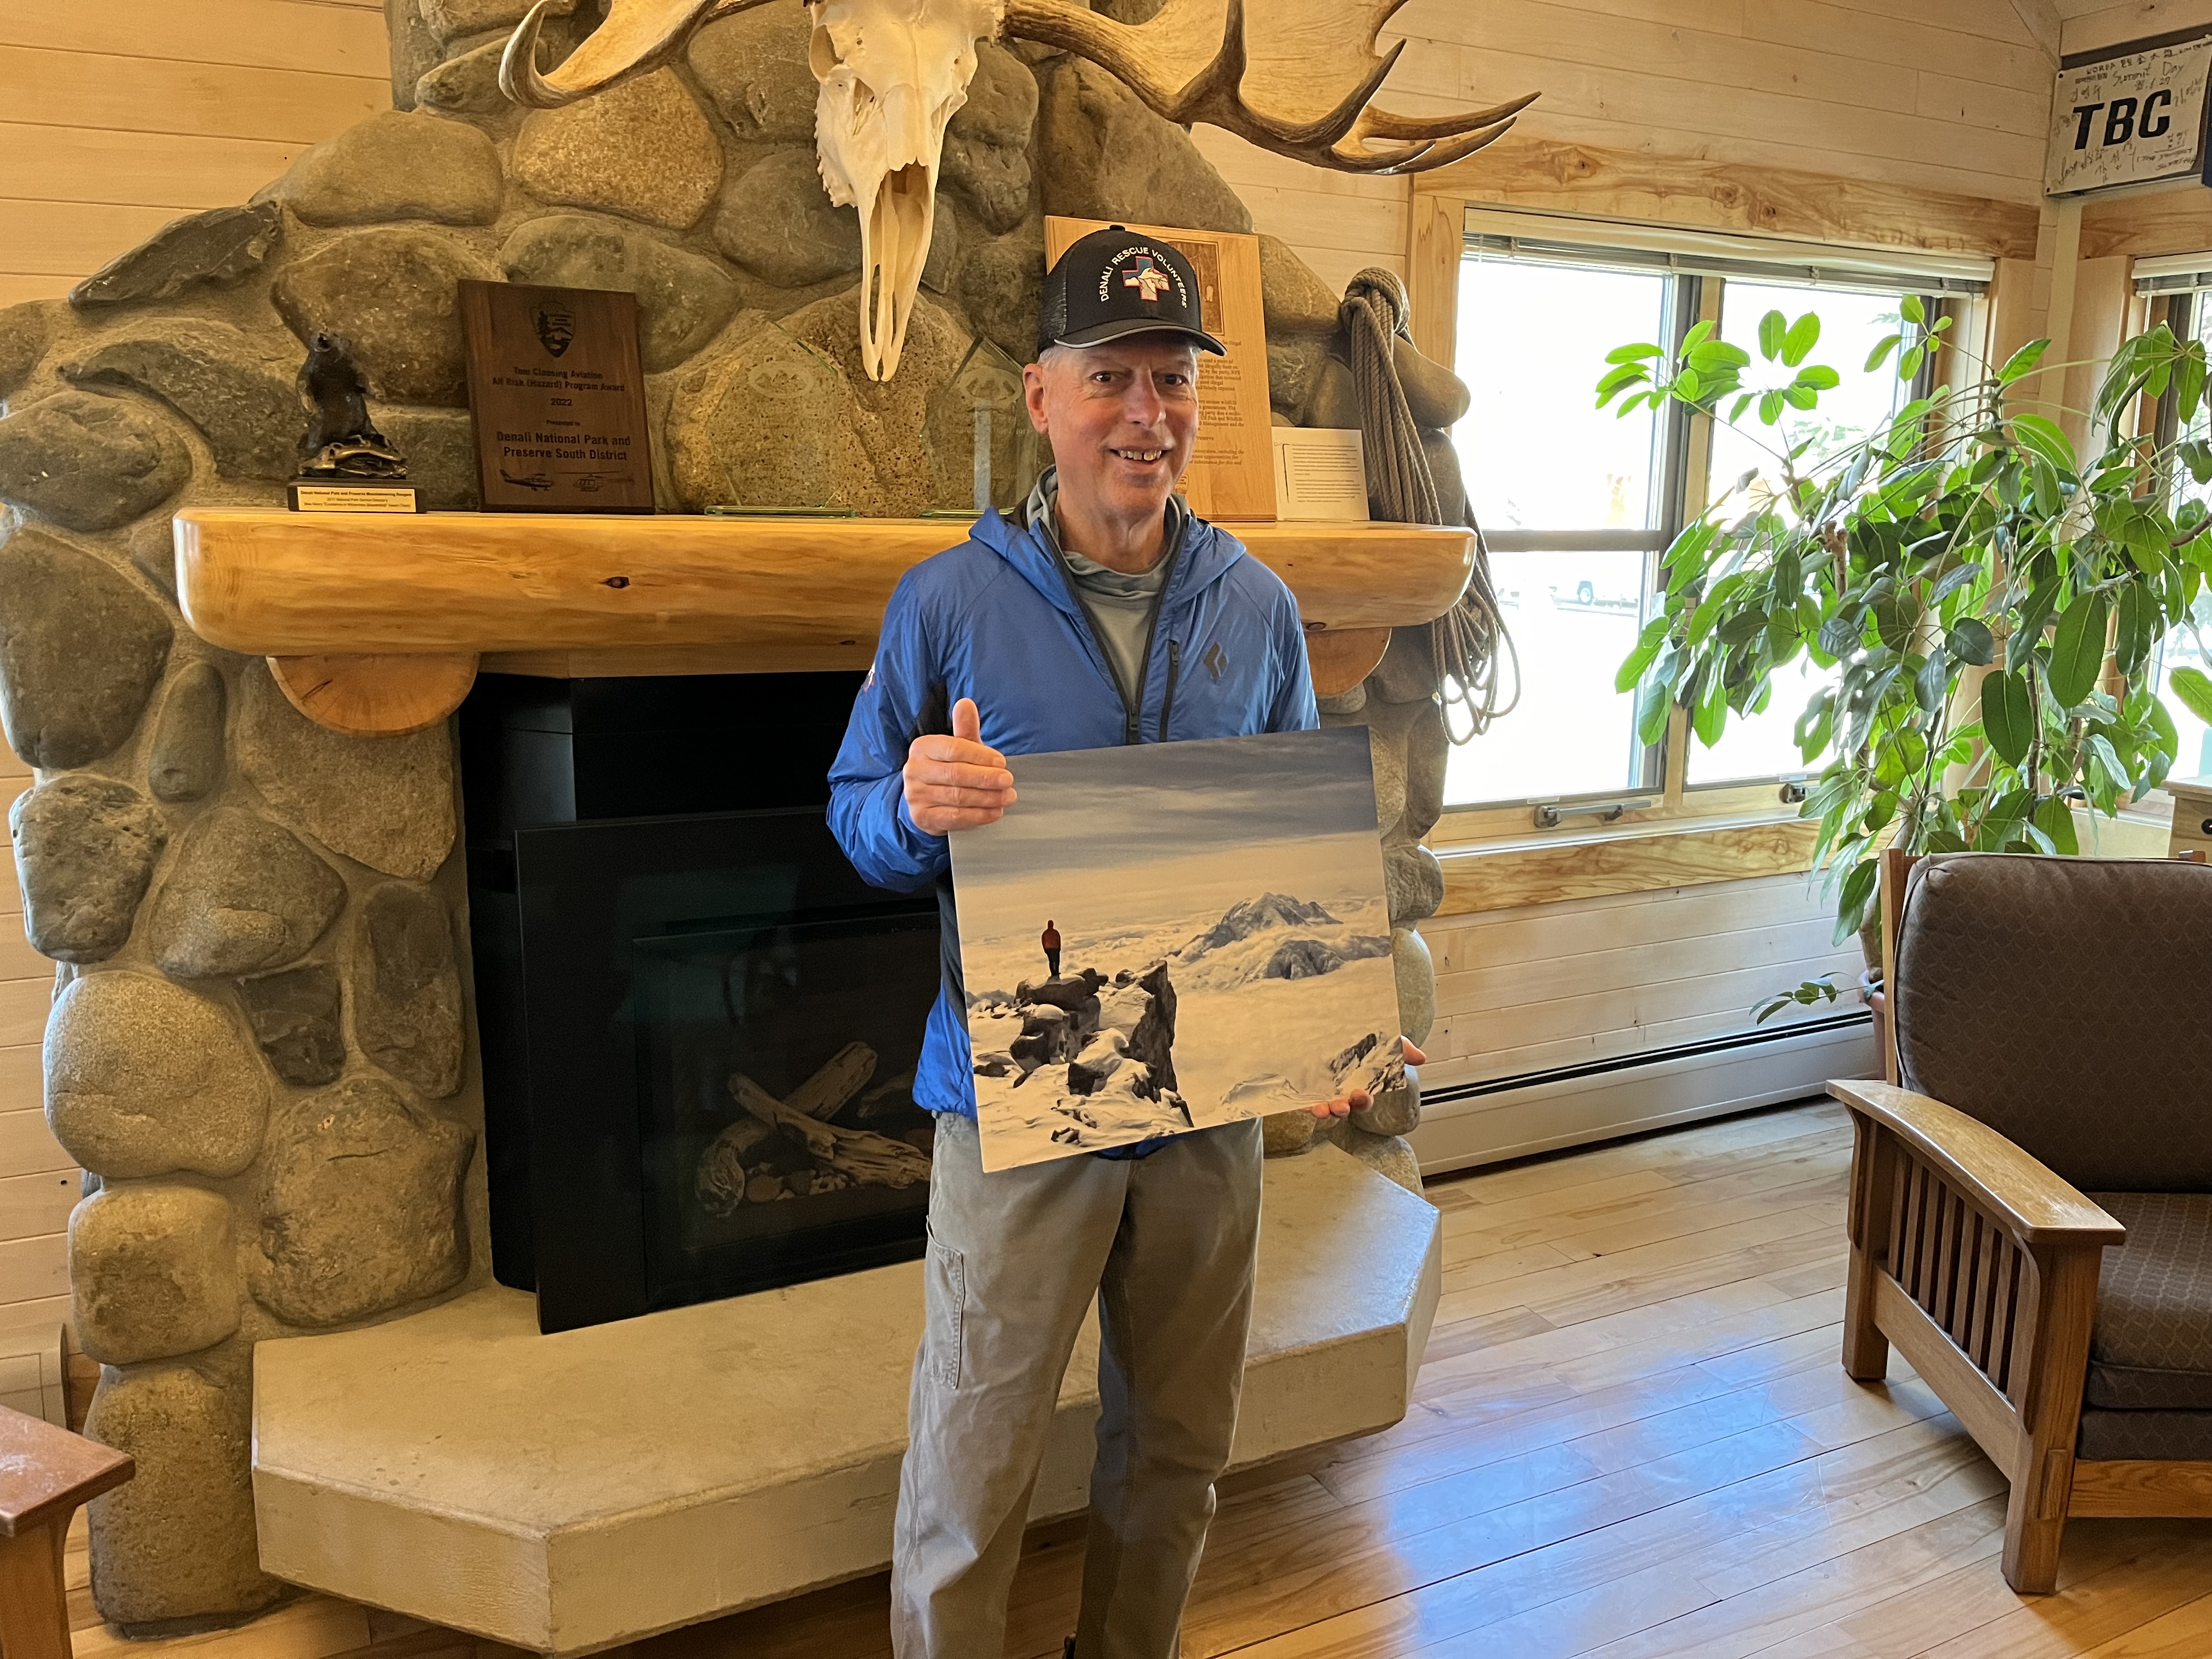 A smiling man in a baseball cap holds a photographic print in front of a stone fireplace